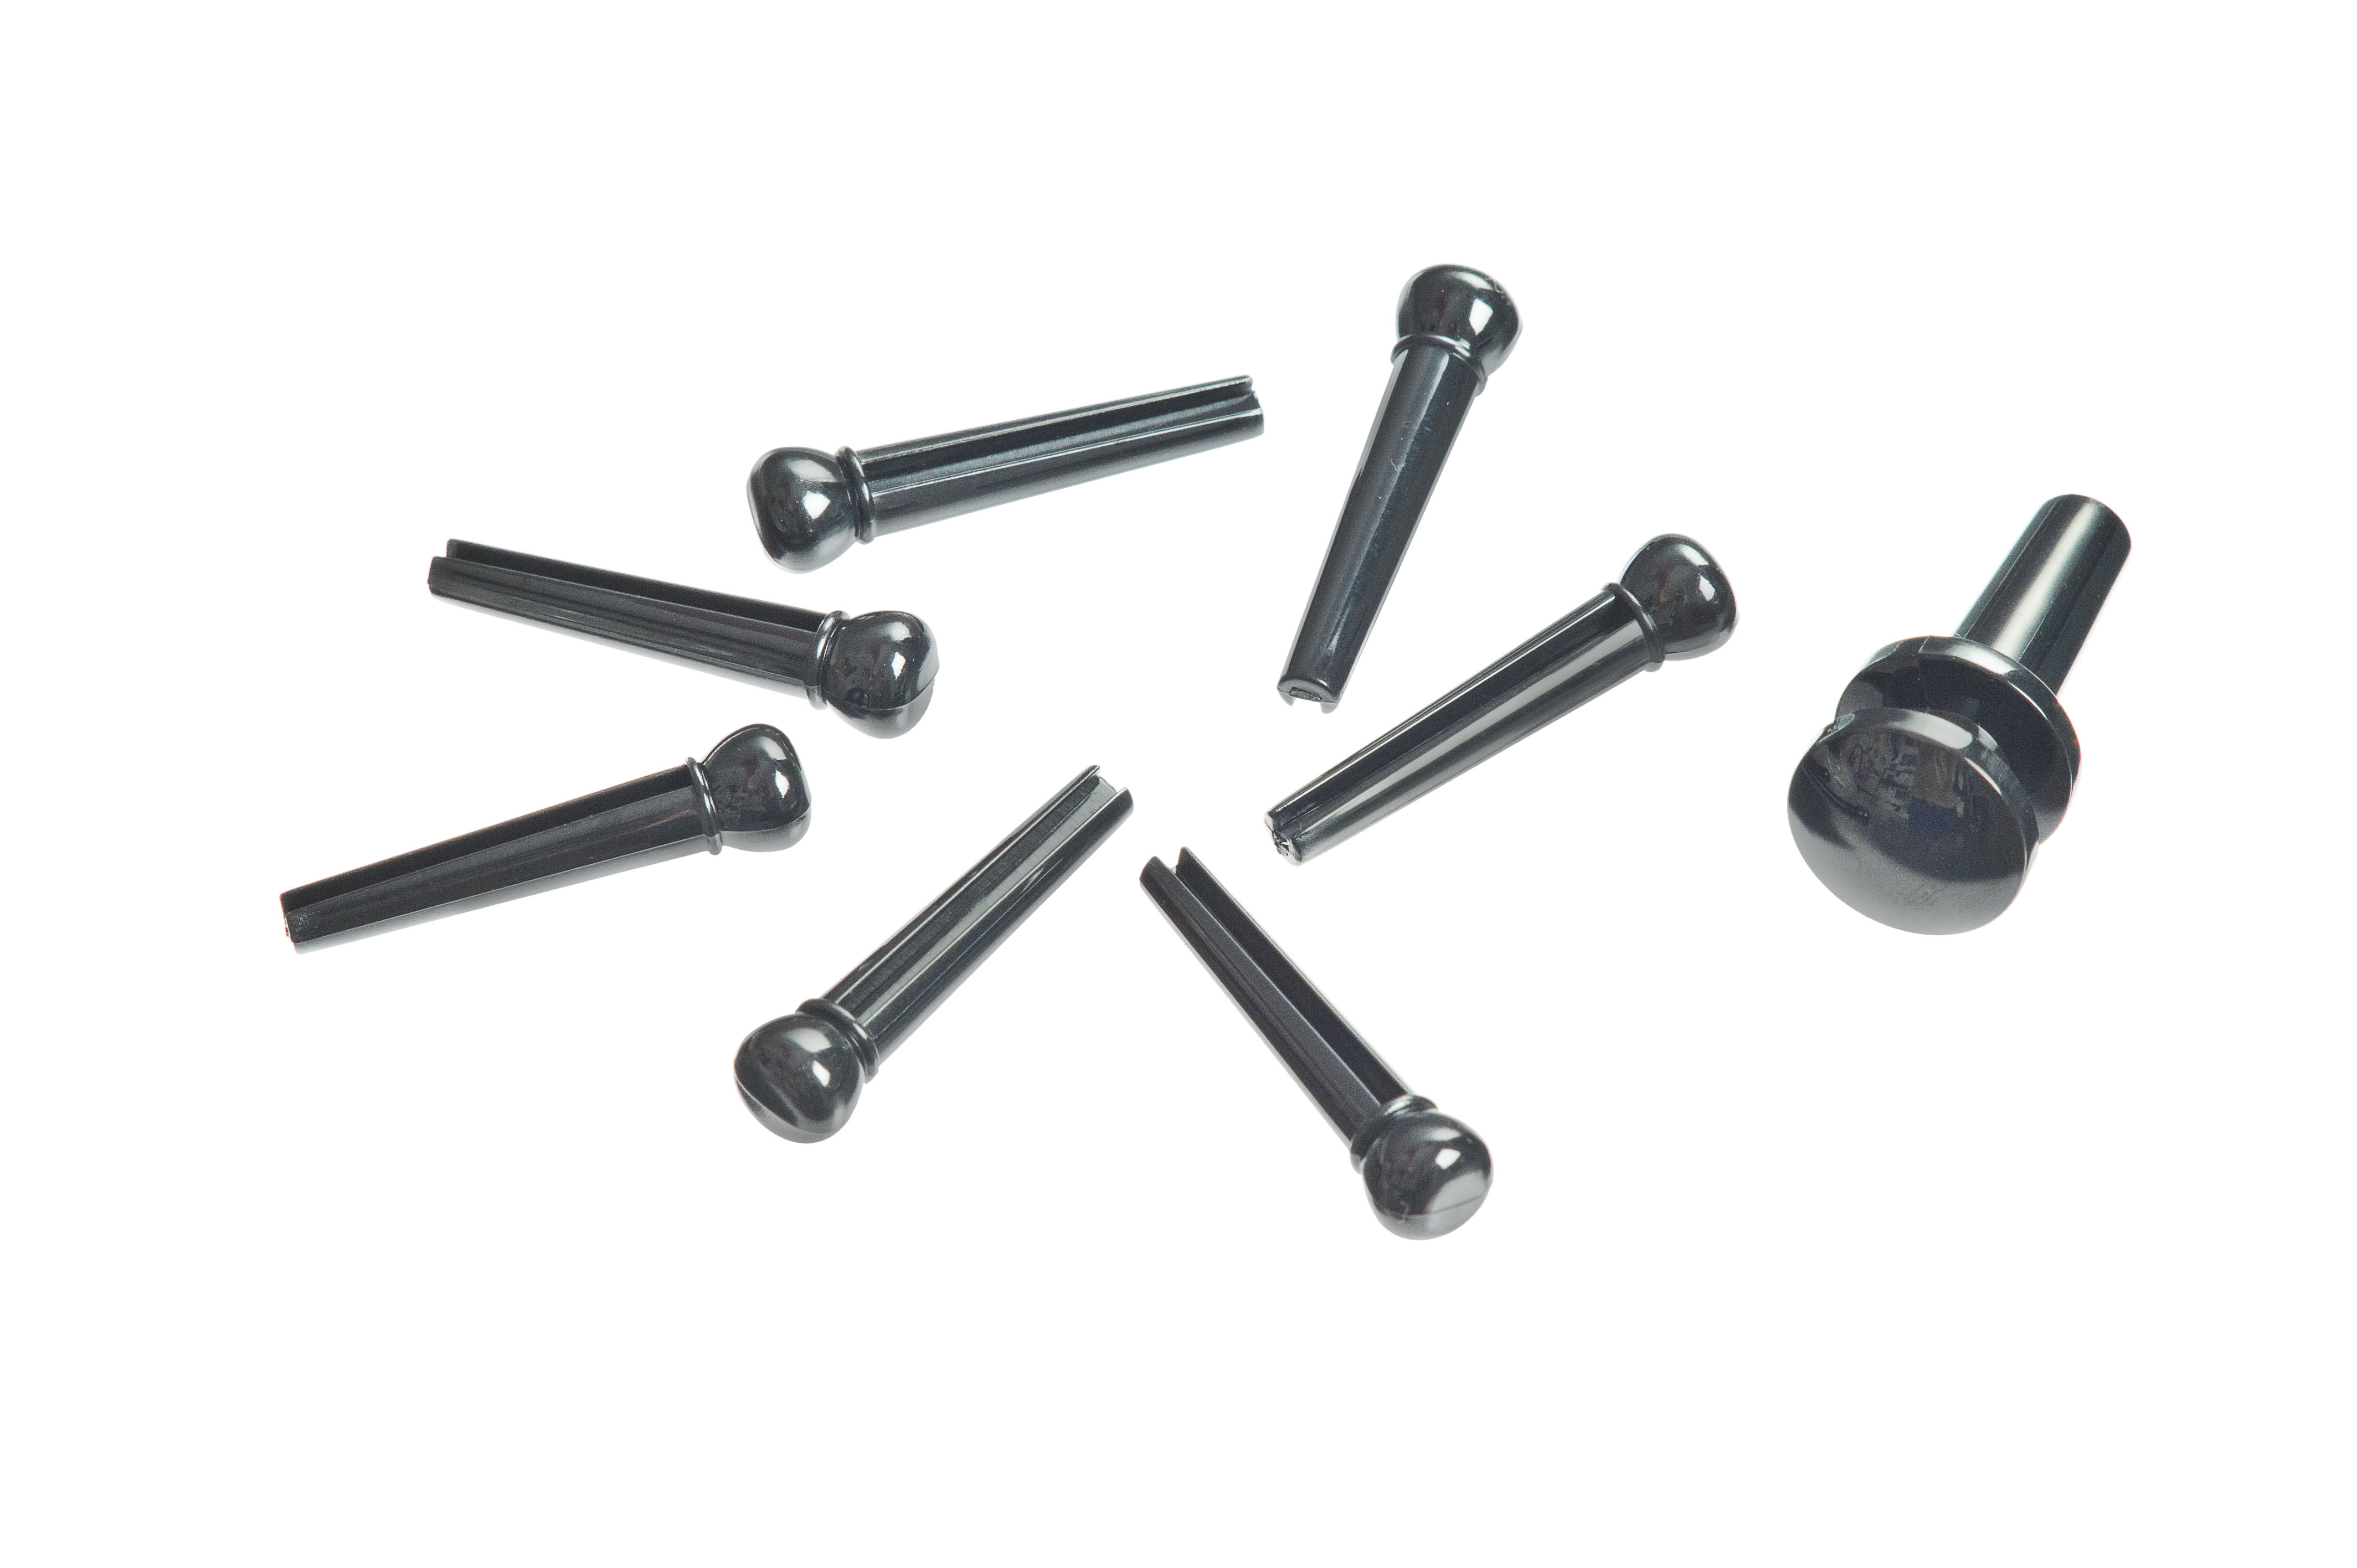 D'Addario Injected Molded Bridge Pins with End Pin, Set of 7, Ebony